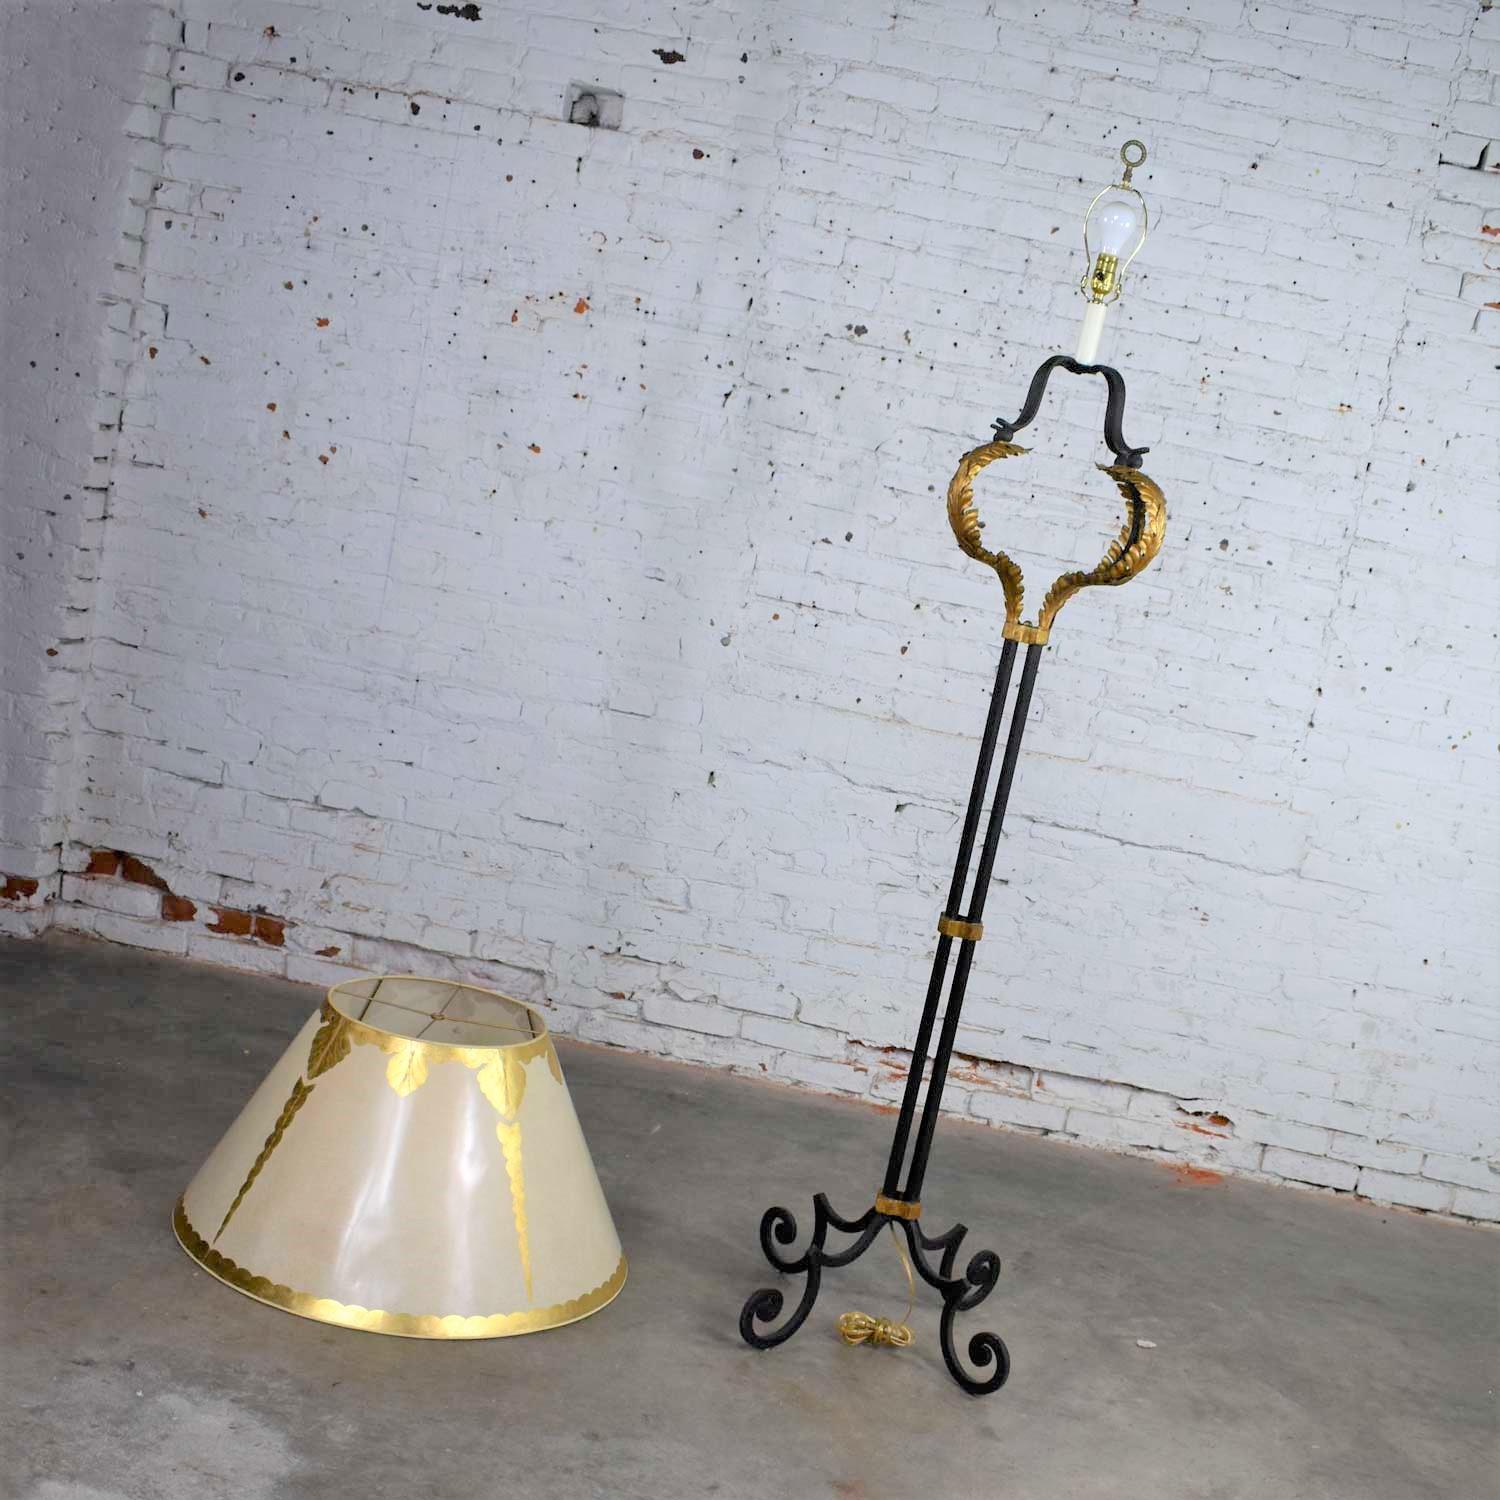 Monumental Neoclassical Iron Floor Lamp Acanthus Leaf Design & Parchment Shade For Sale 5